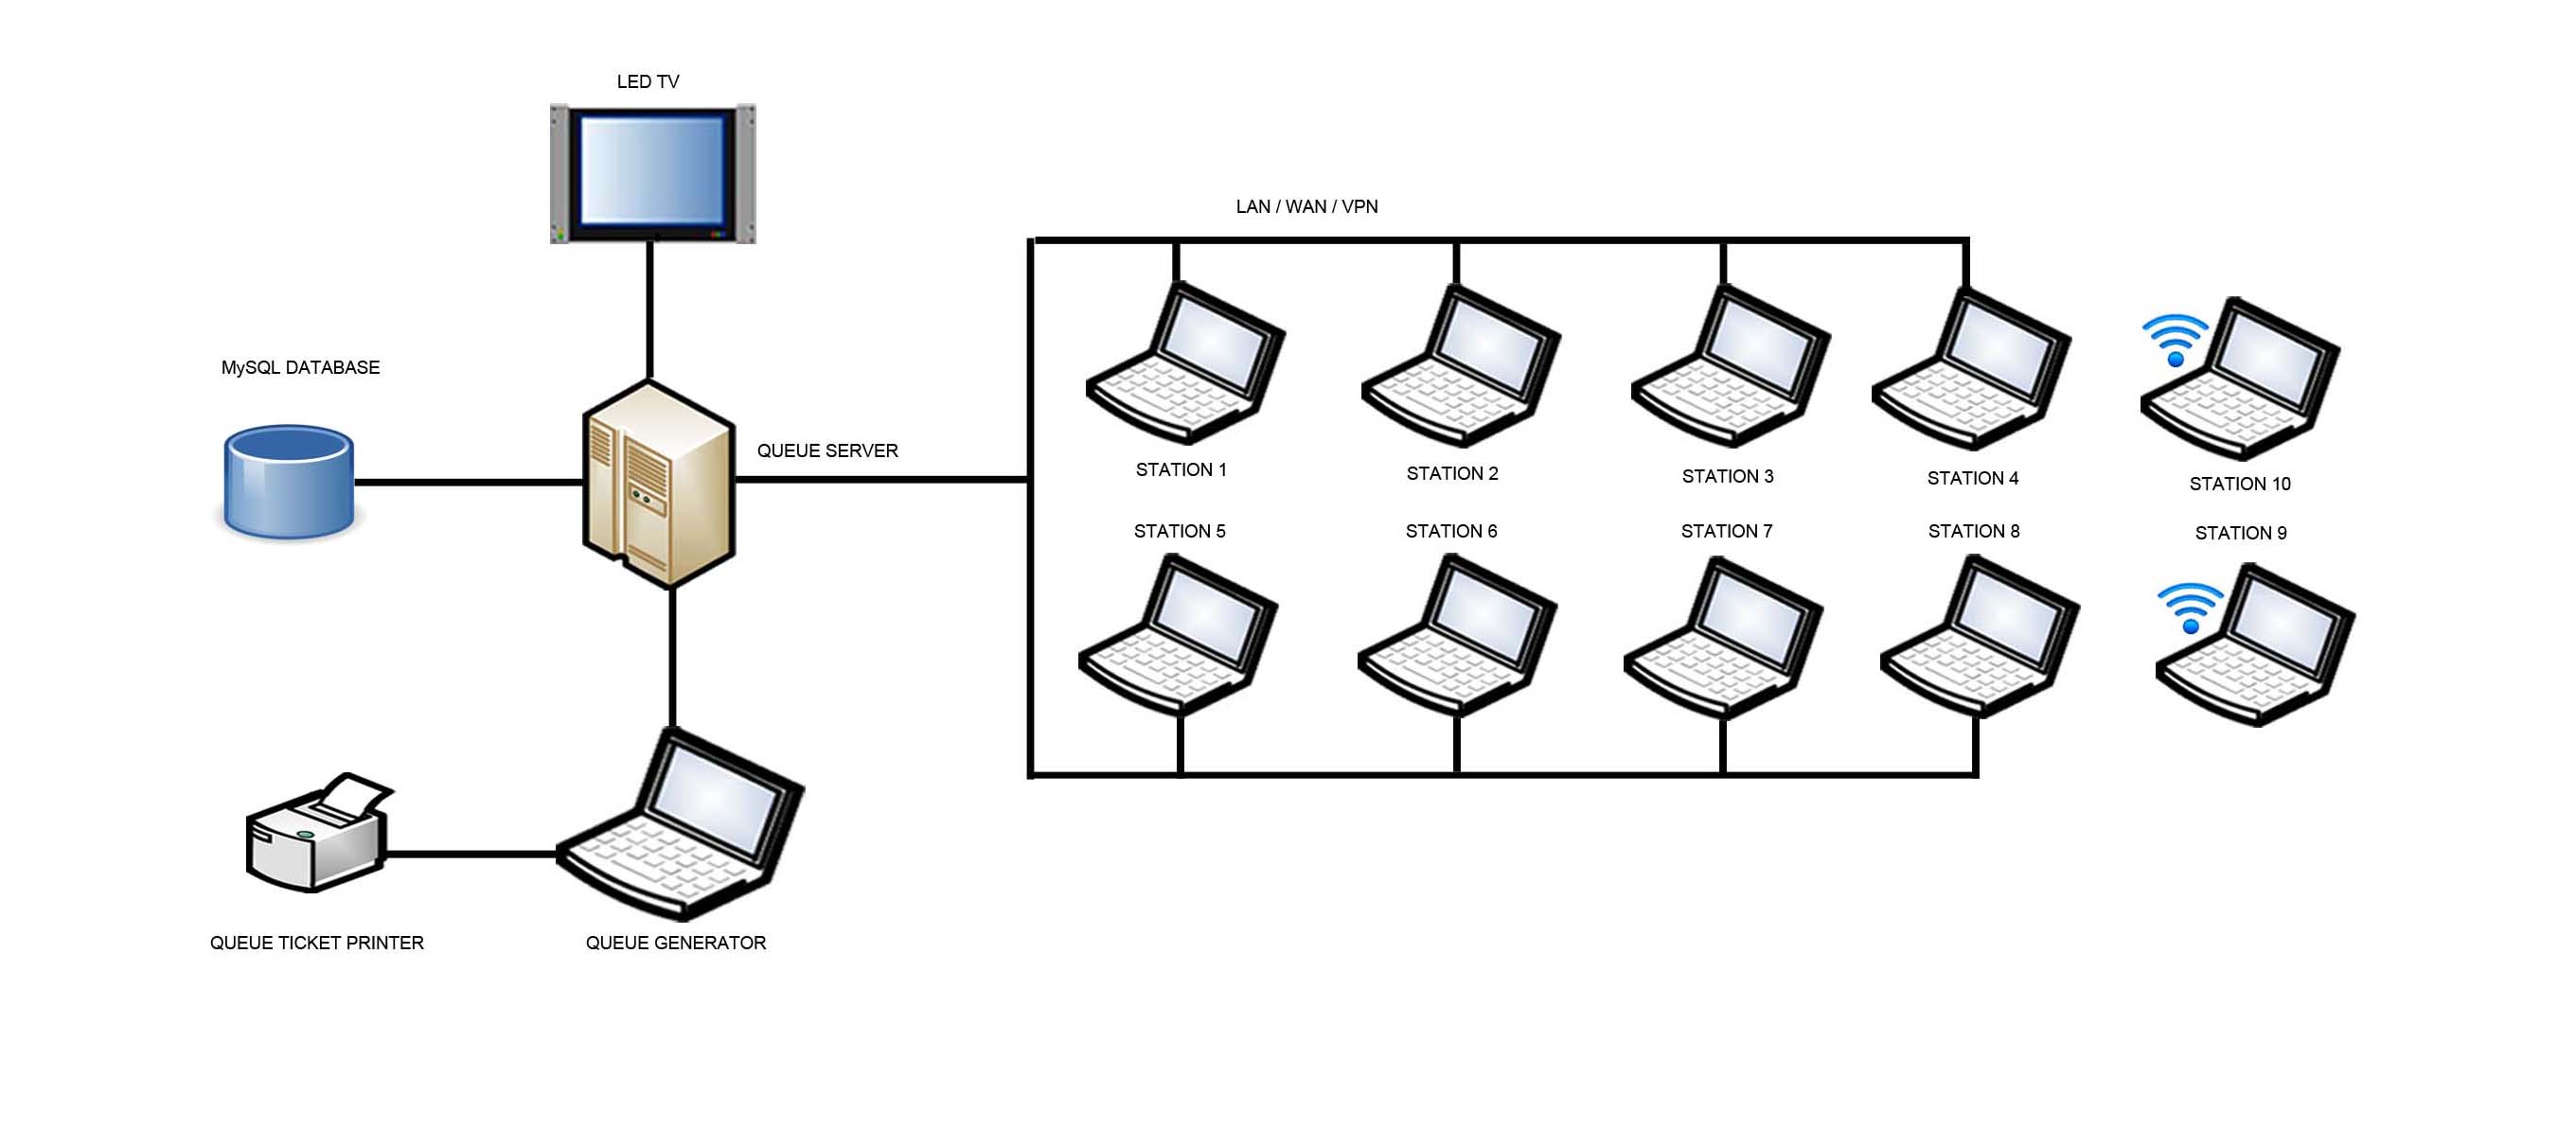 Network Diagram Using PC or Laptops